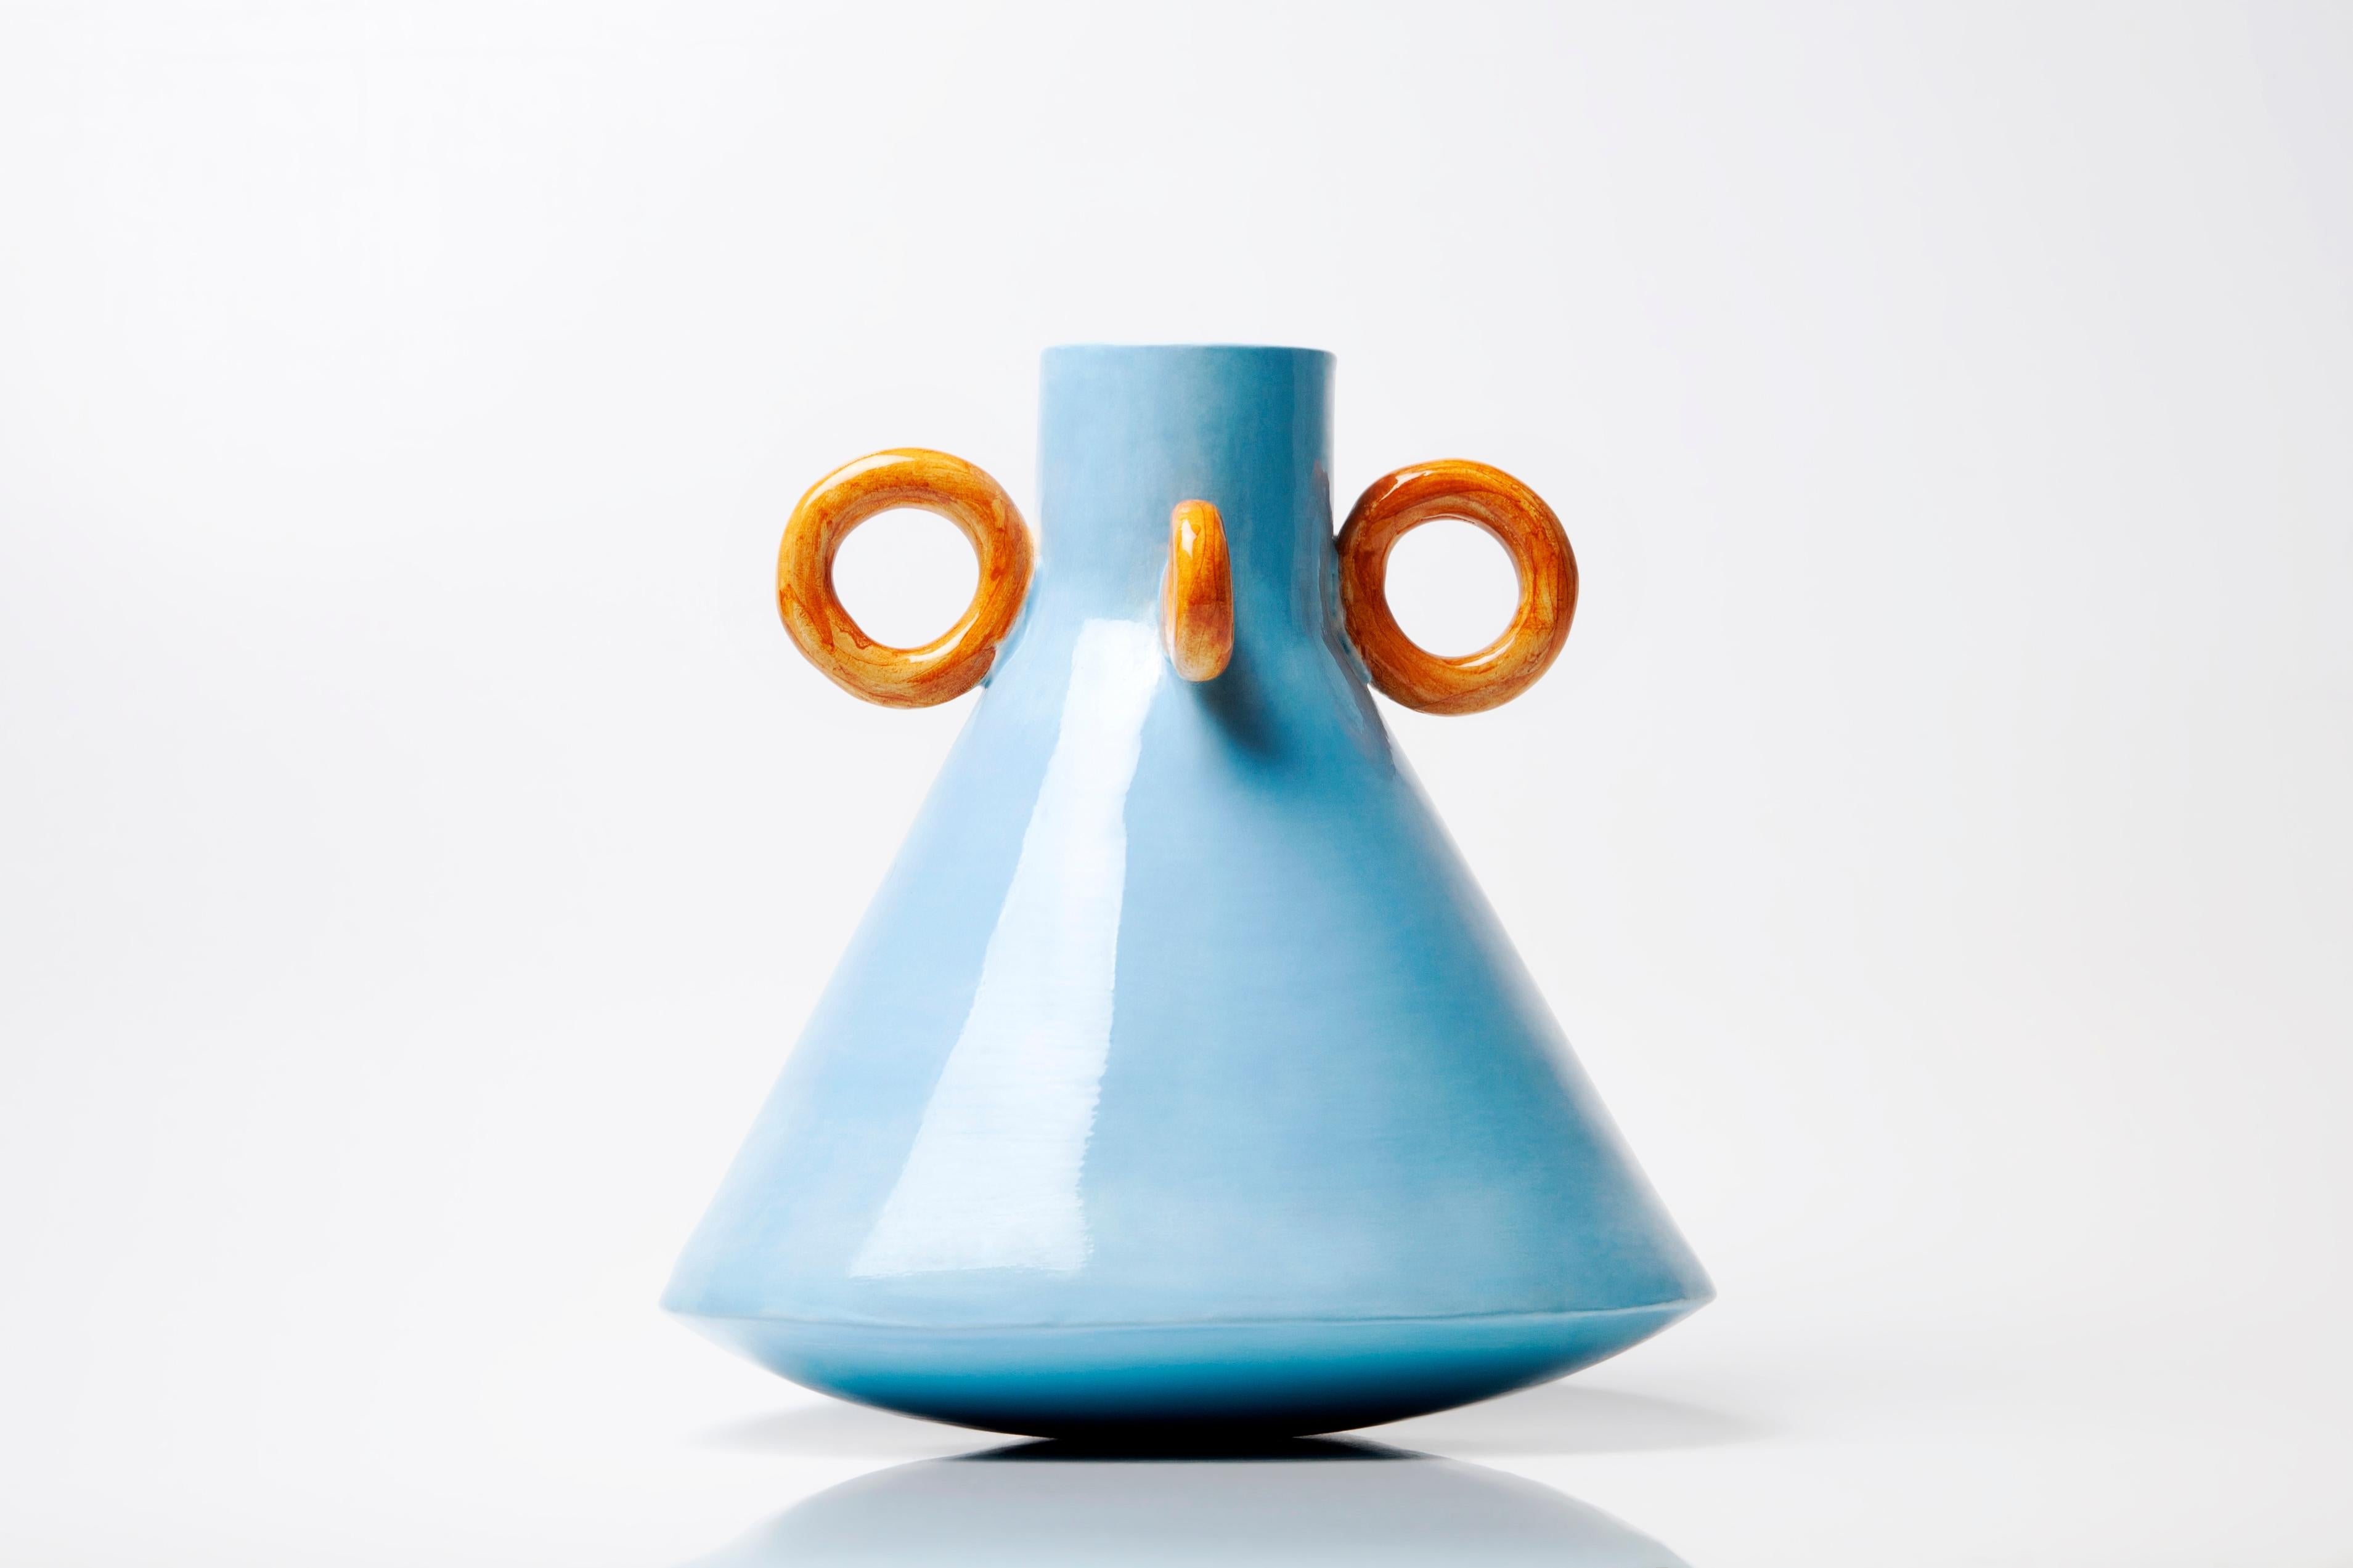 Ramina vase by Arianna De Luca
Dimensions: height 20 x diameter 20 cm 
Materials: ceramic 

Ramina is part of the Folcloristica series. A collection inspired by the mood and lifestyle of the Southern Italian villages. The vase revisits shapes and